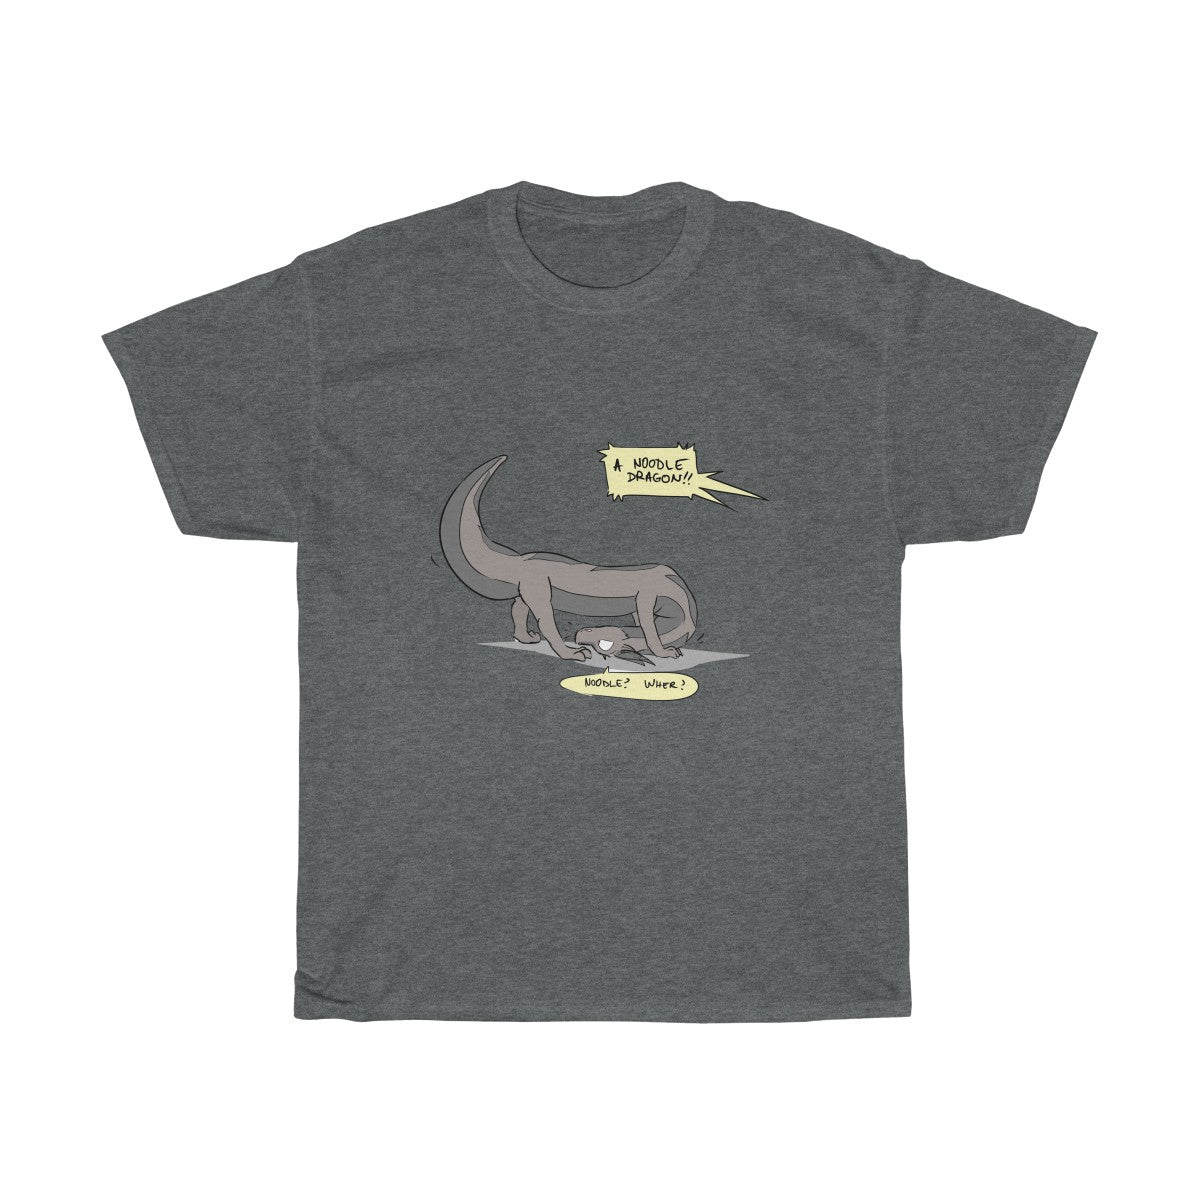 Confused Noodle Dragon - T-Shirt T-Shirt Zenonclaw Dark Heather S 